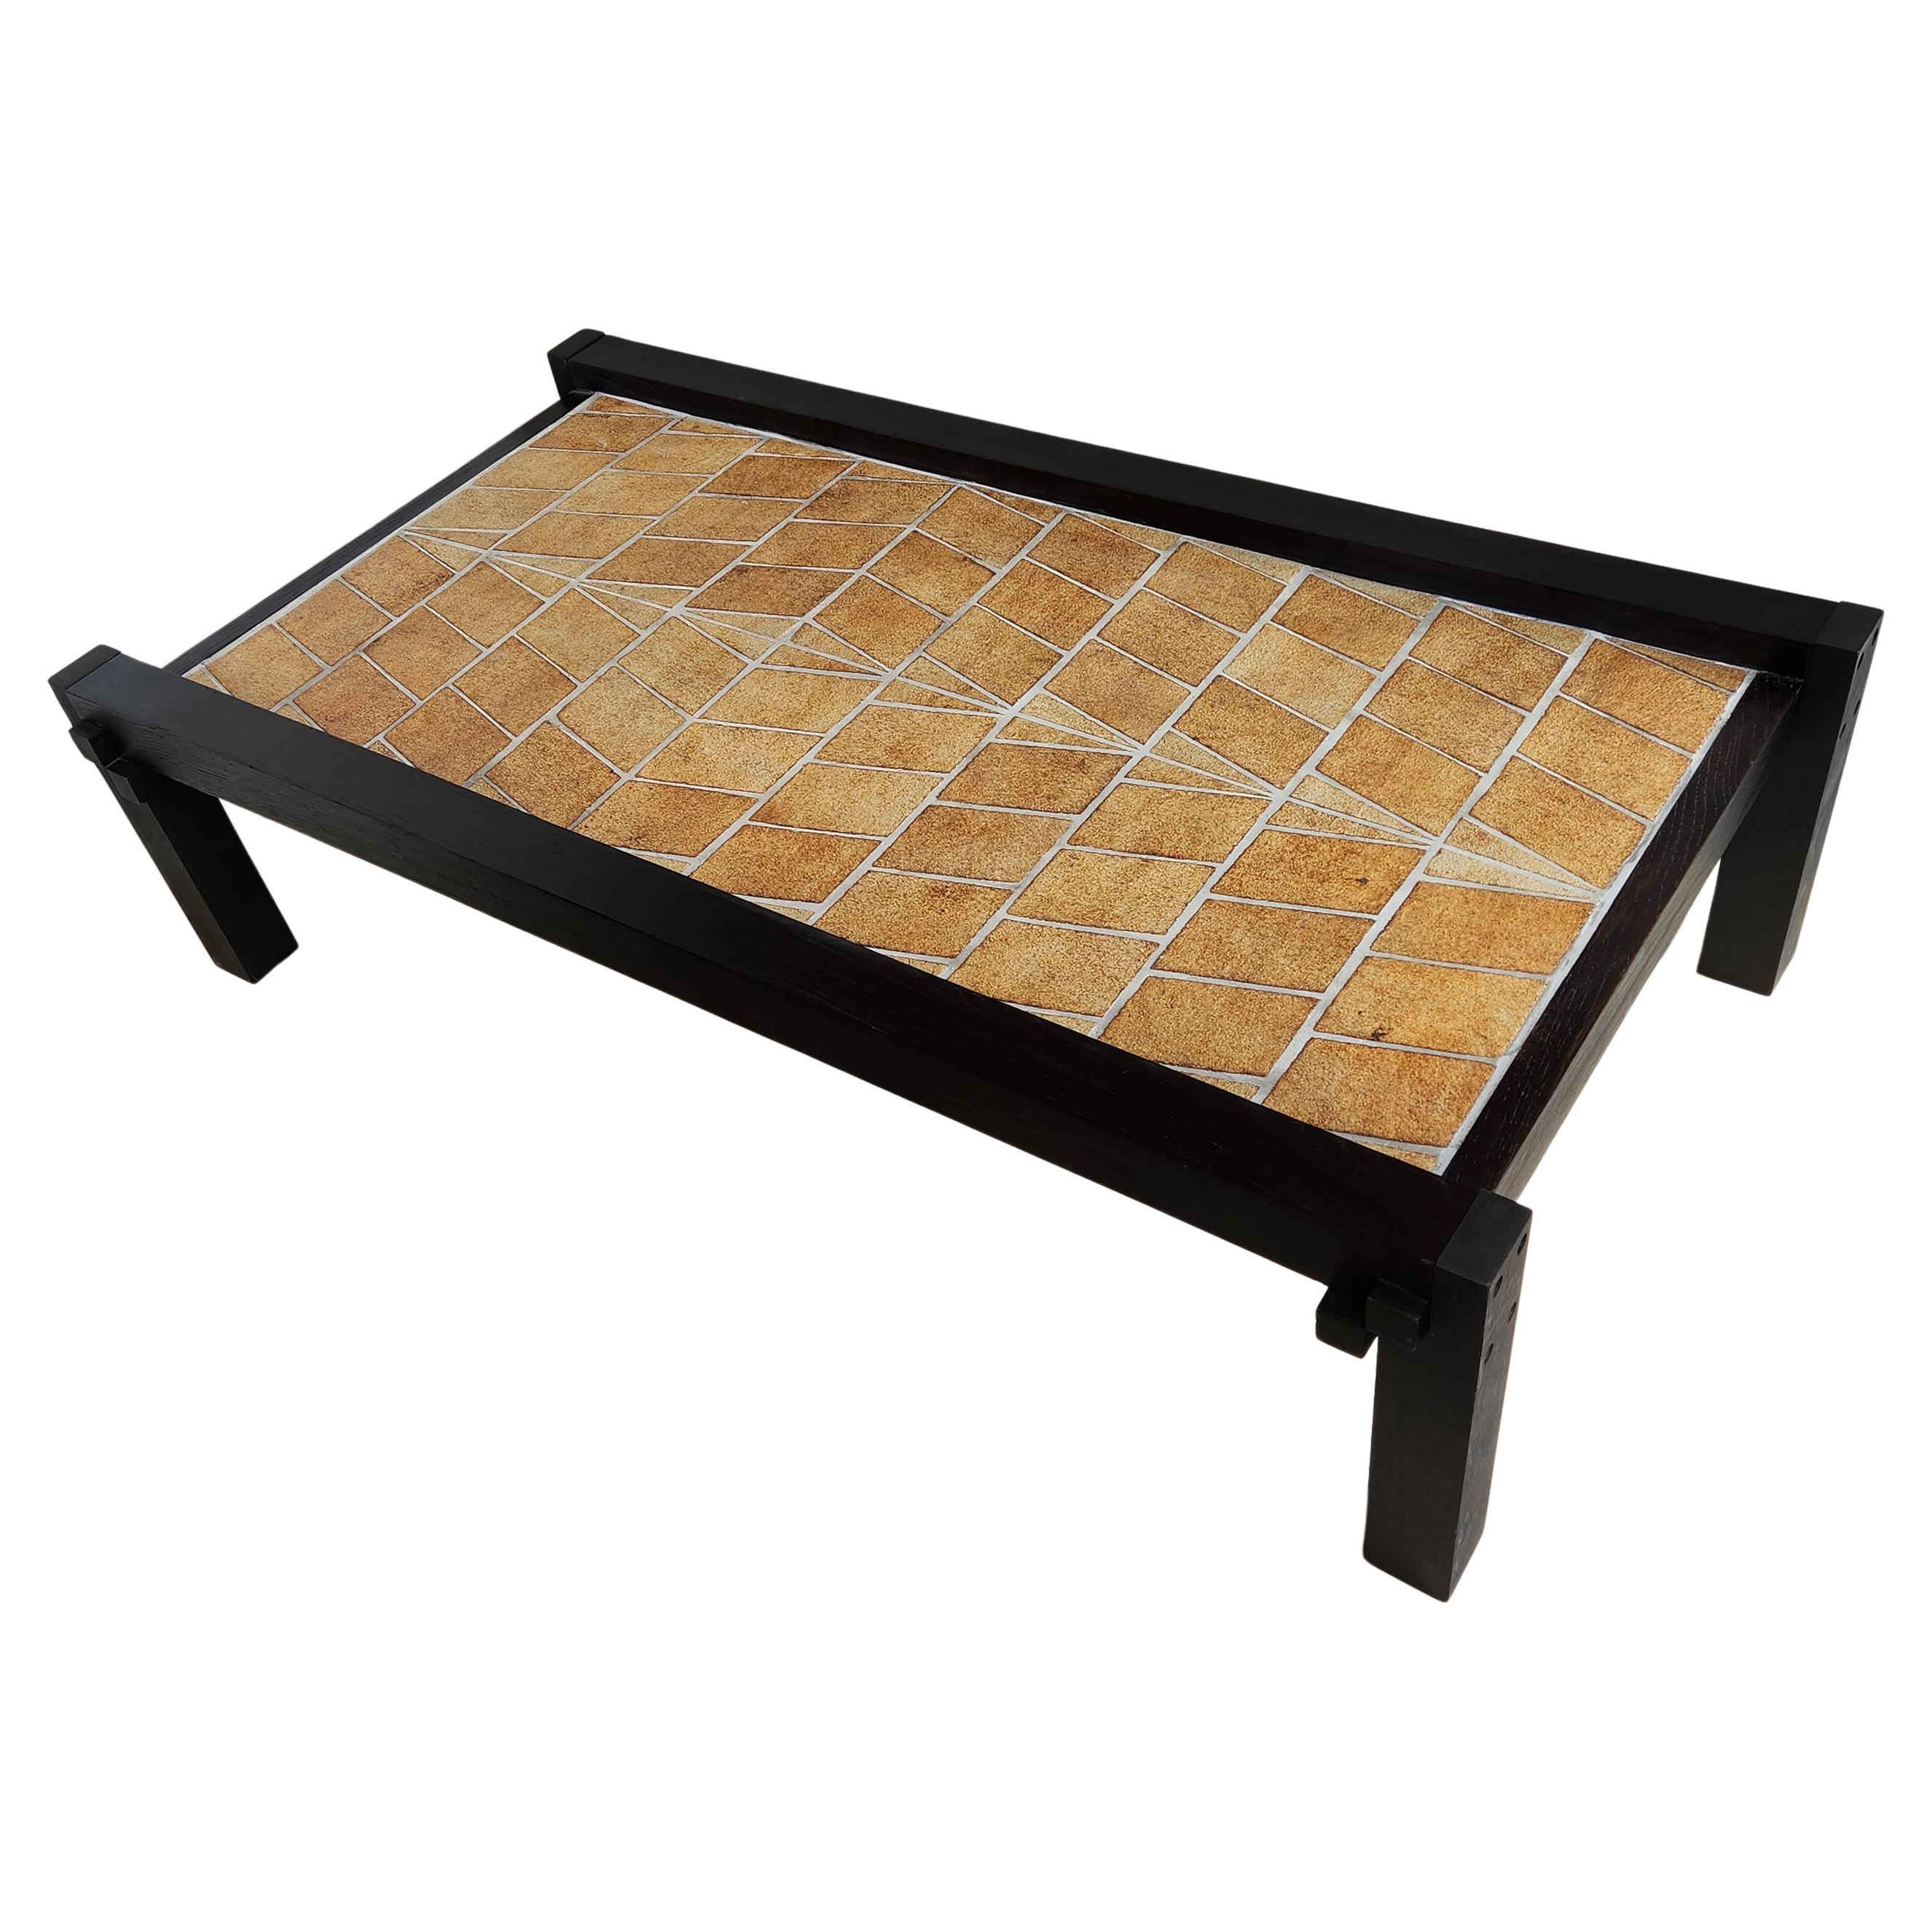 Roger Capron - Ceramic Coffee Table, Terra Cotta Tiles with a Sunken Wood Frame  For Sale